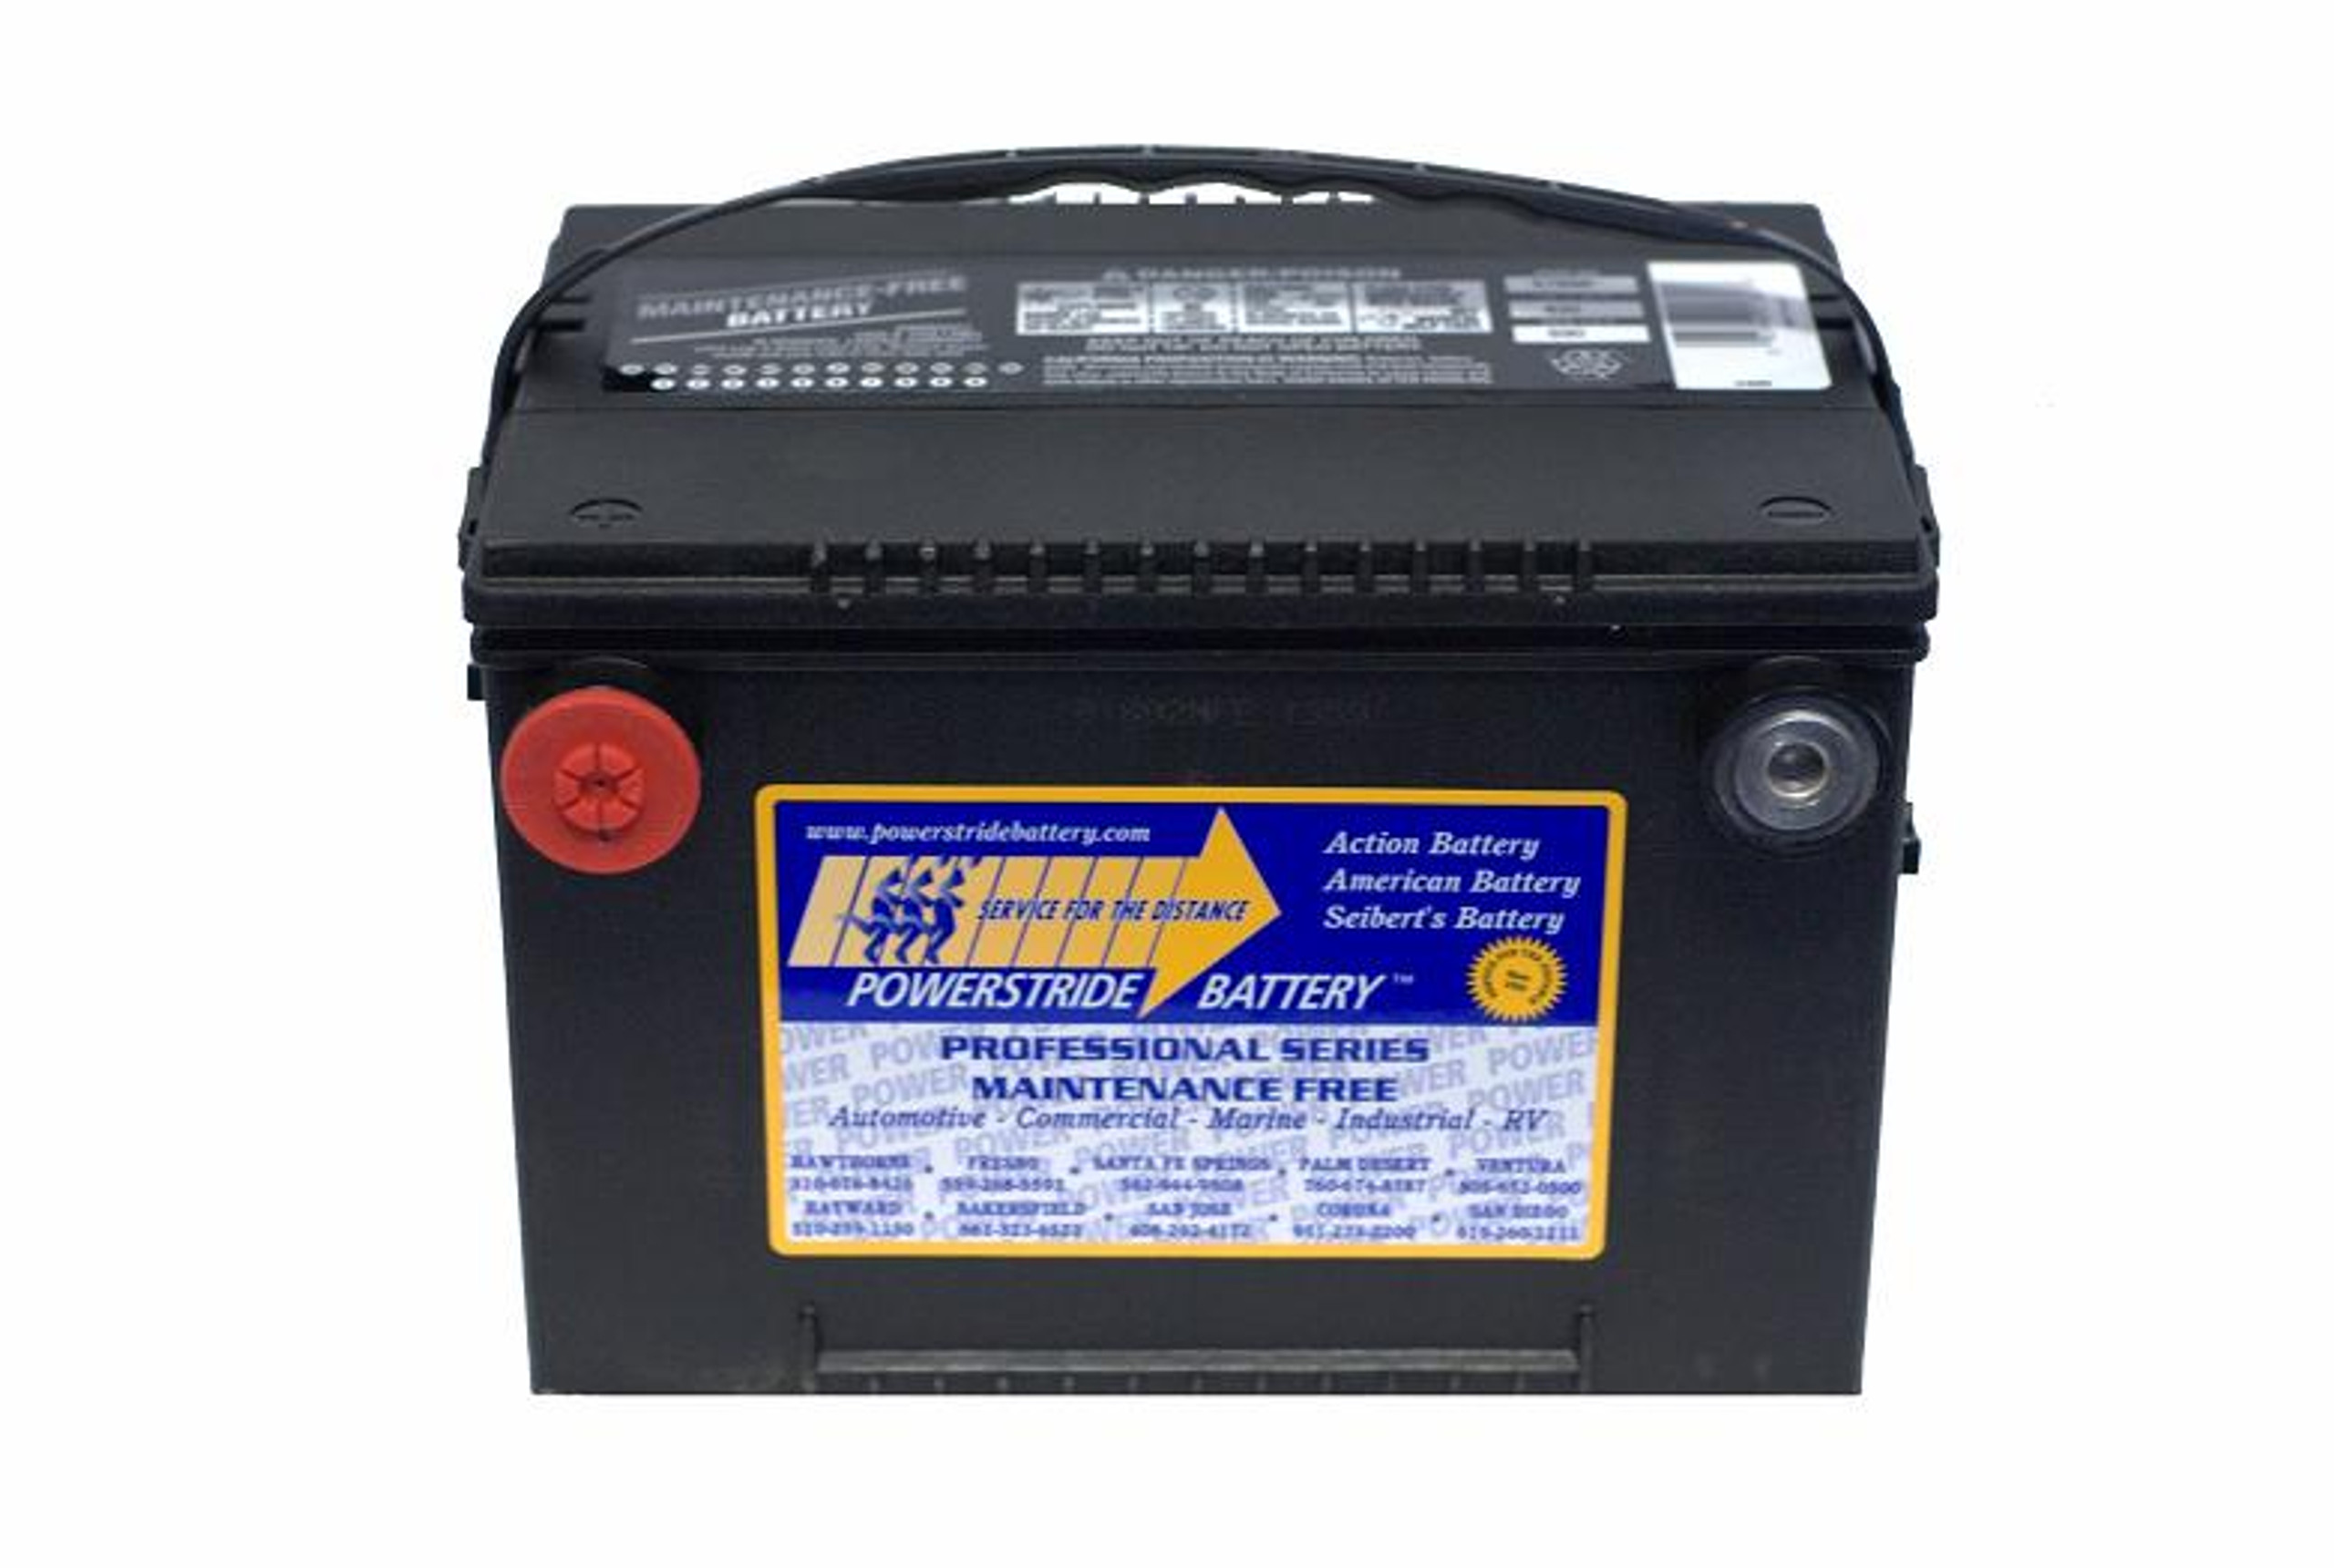 Powerstride Bci Group 22nf Battery Ps22nf 575